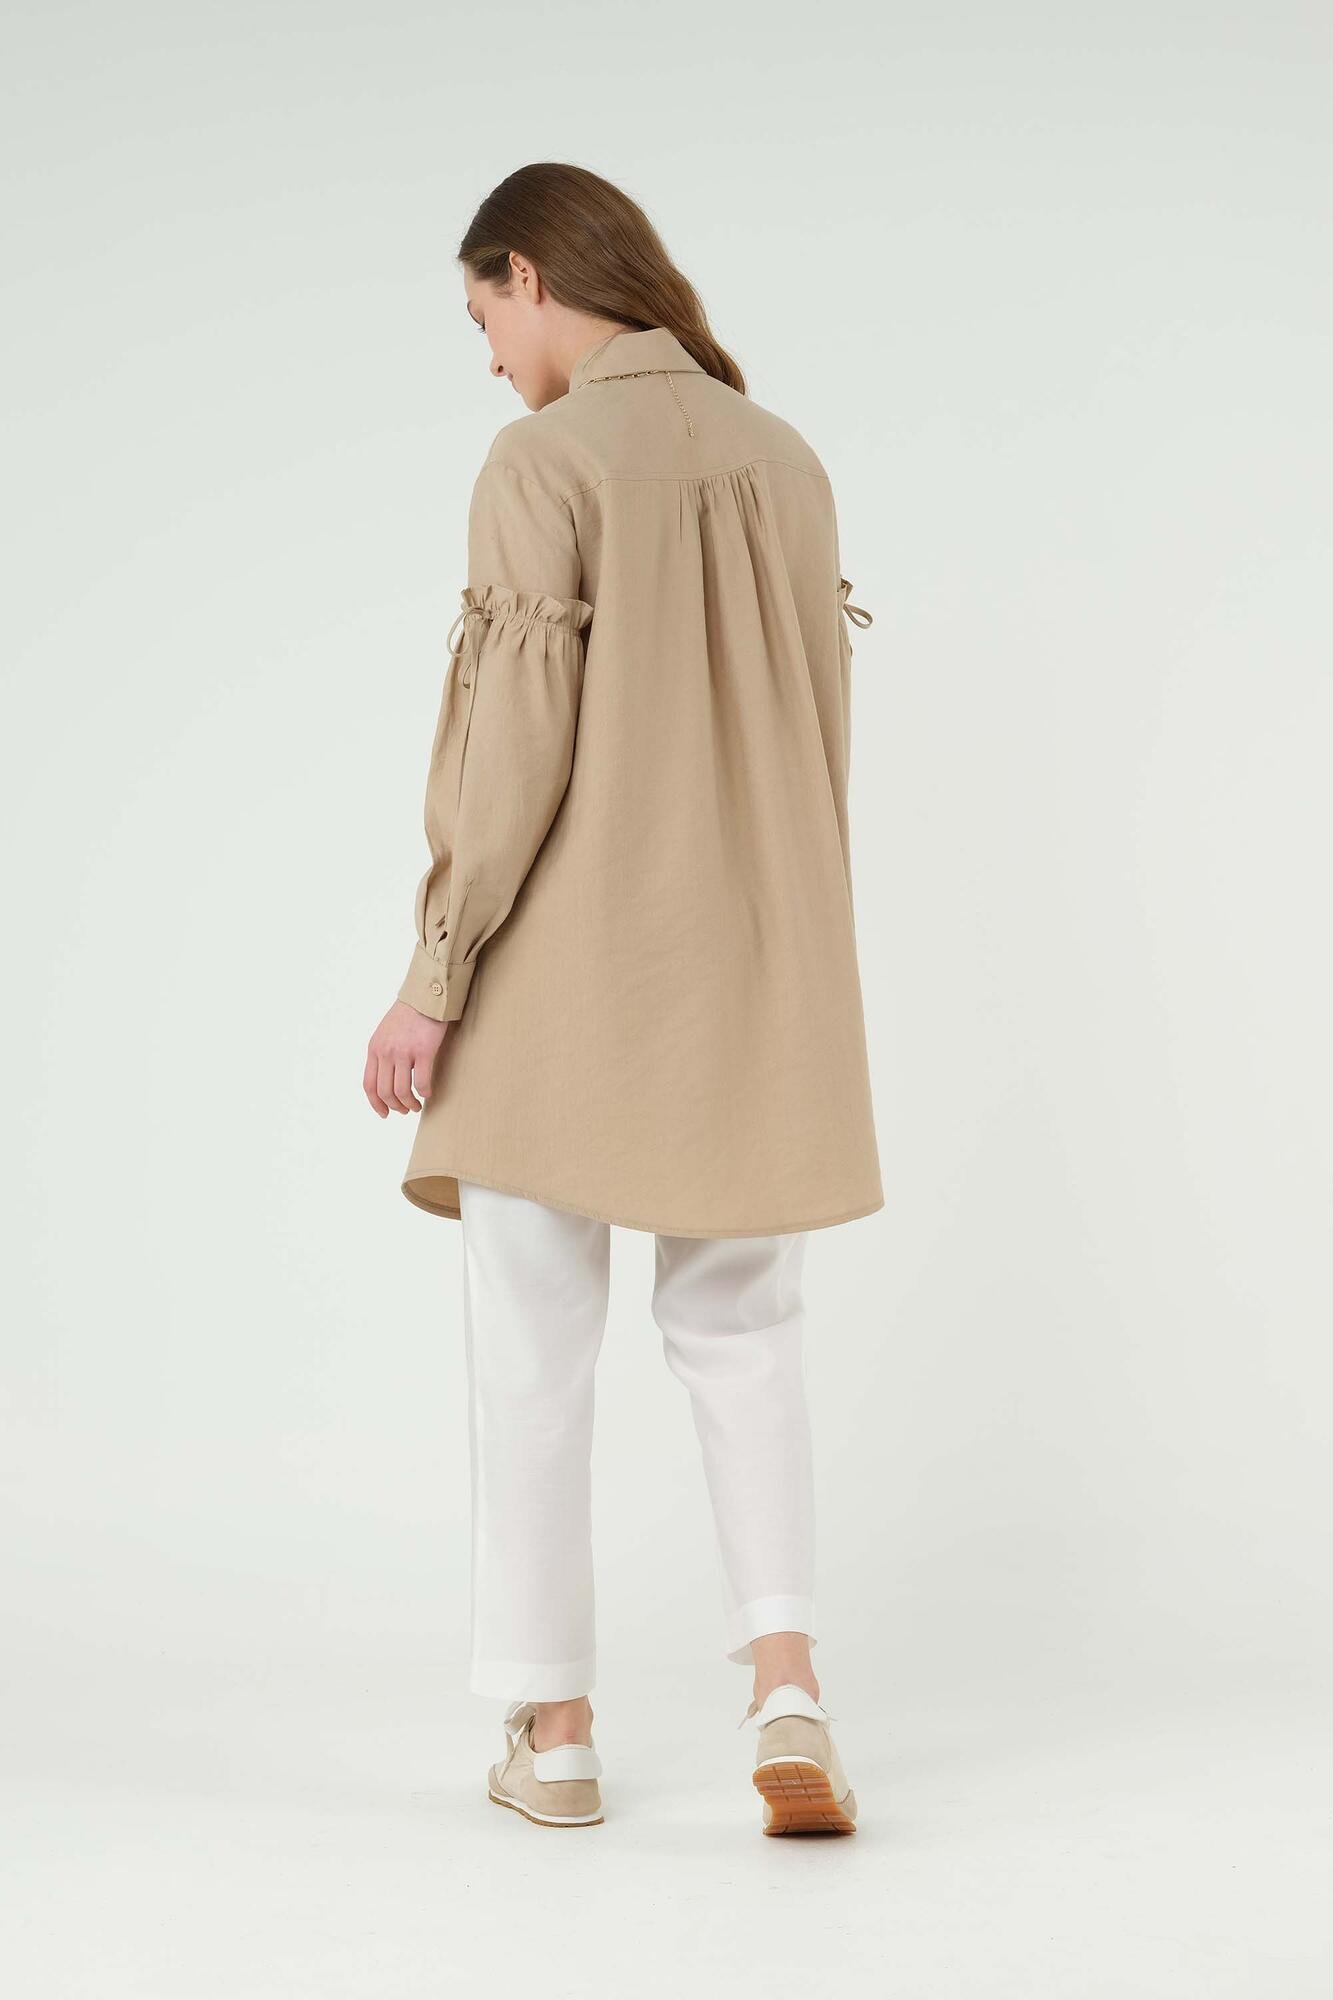 Strapped Arms Tunic Light Camel 